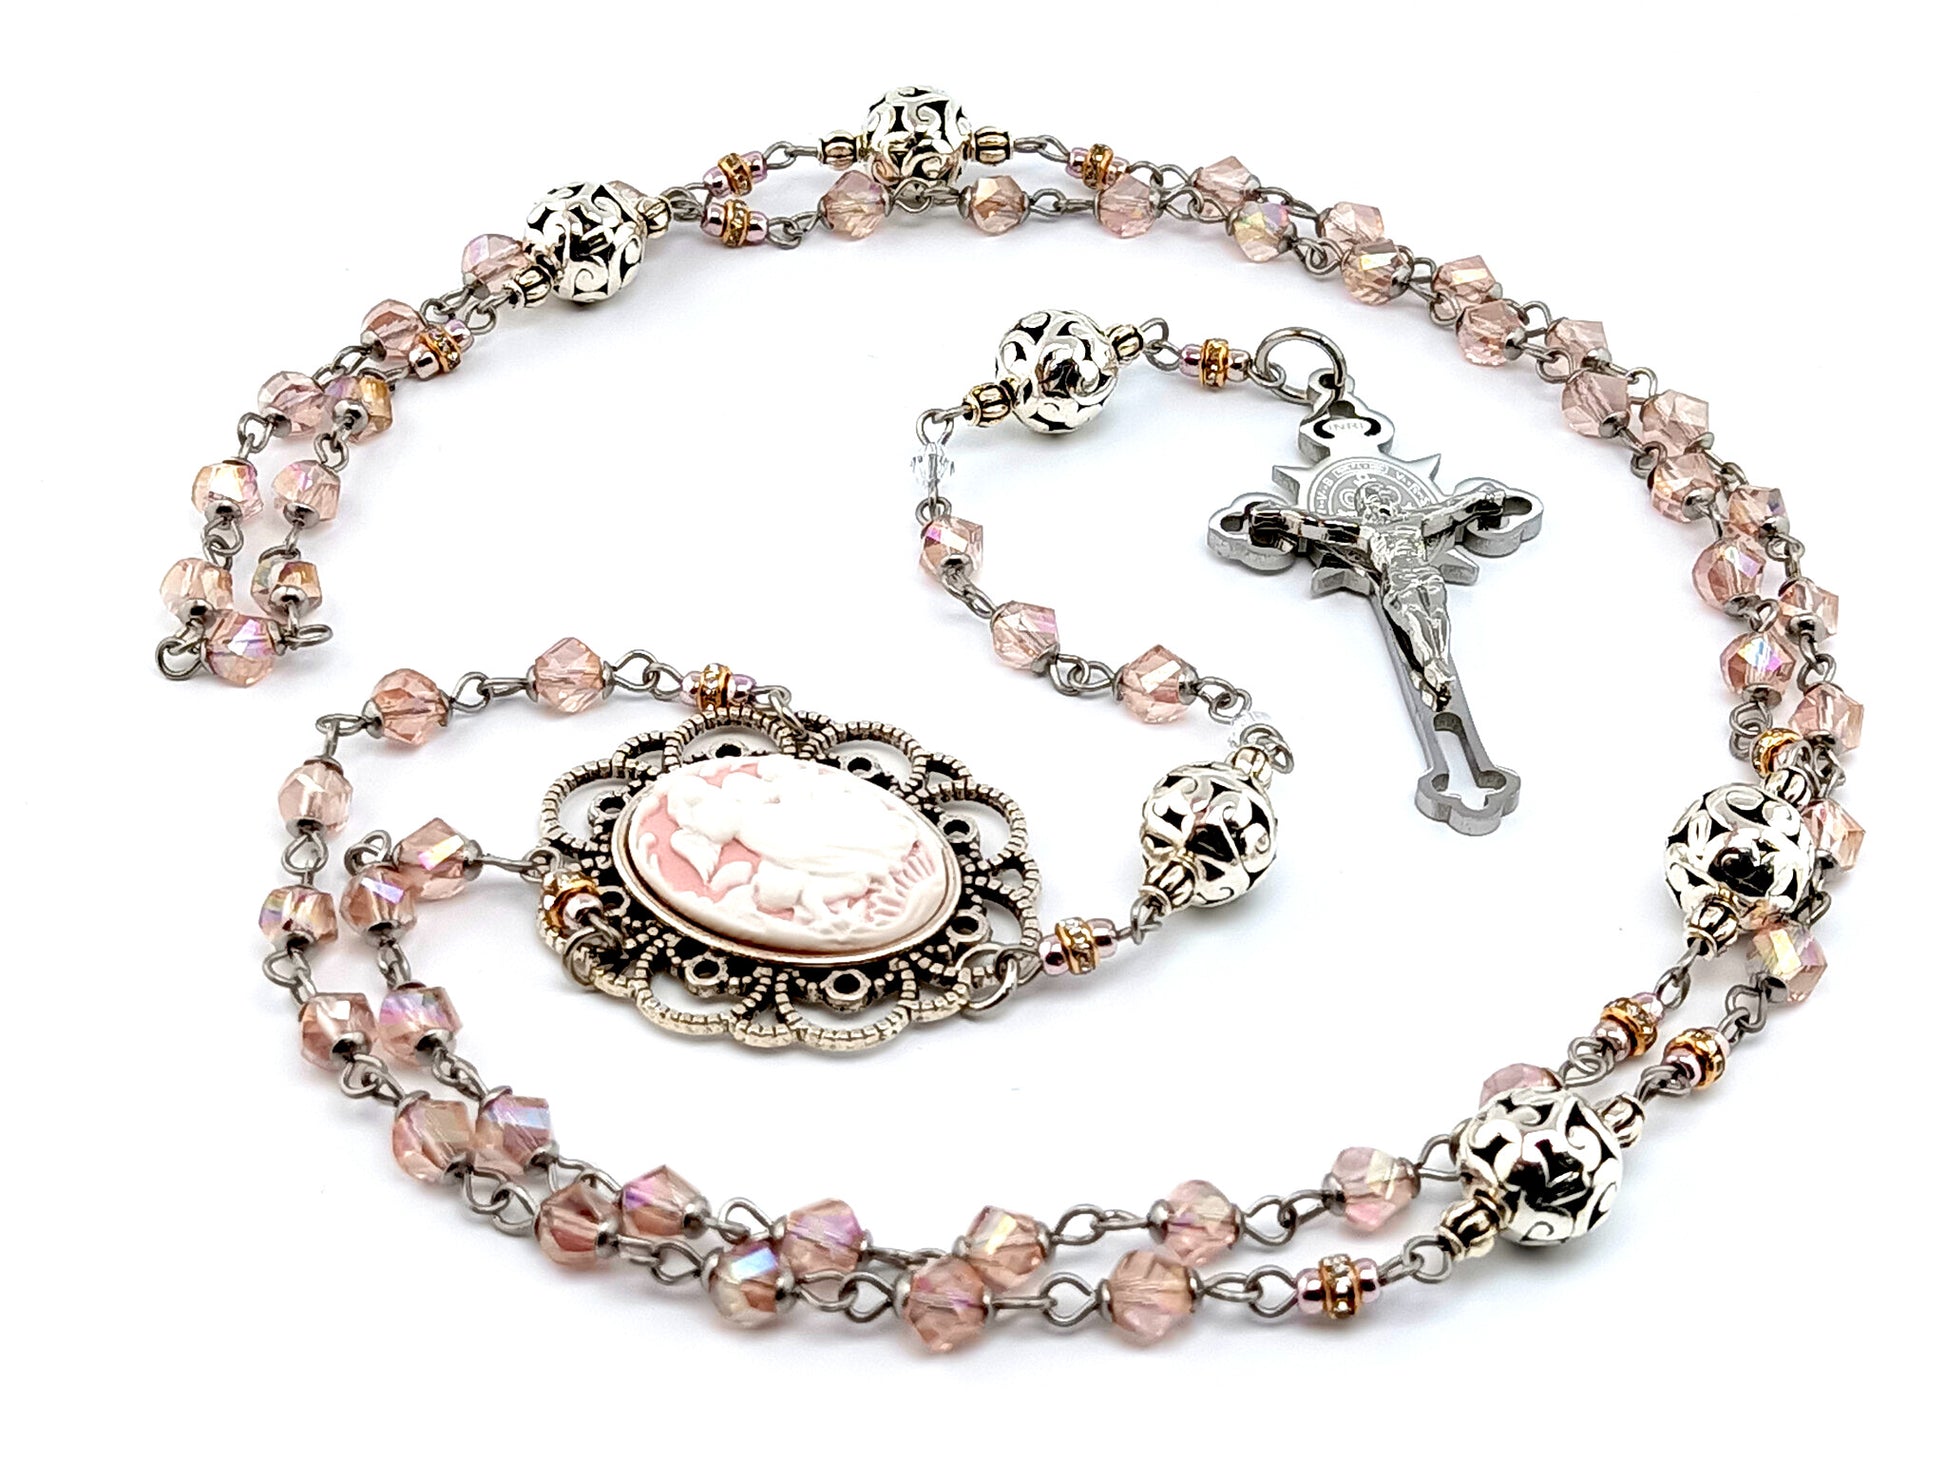 Guardian Angel cameo unique rosary beads with glass and silver beads and stainless steel engraved Saint Benedict crucifix.